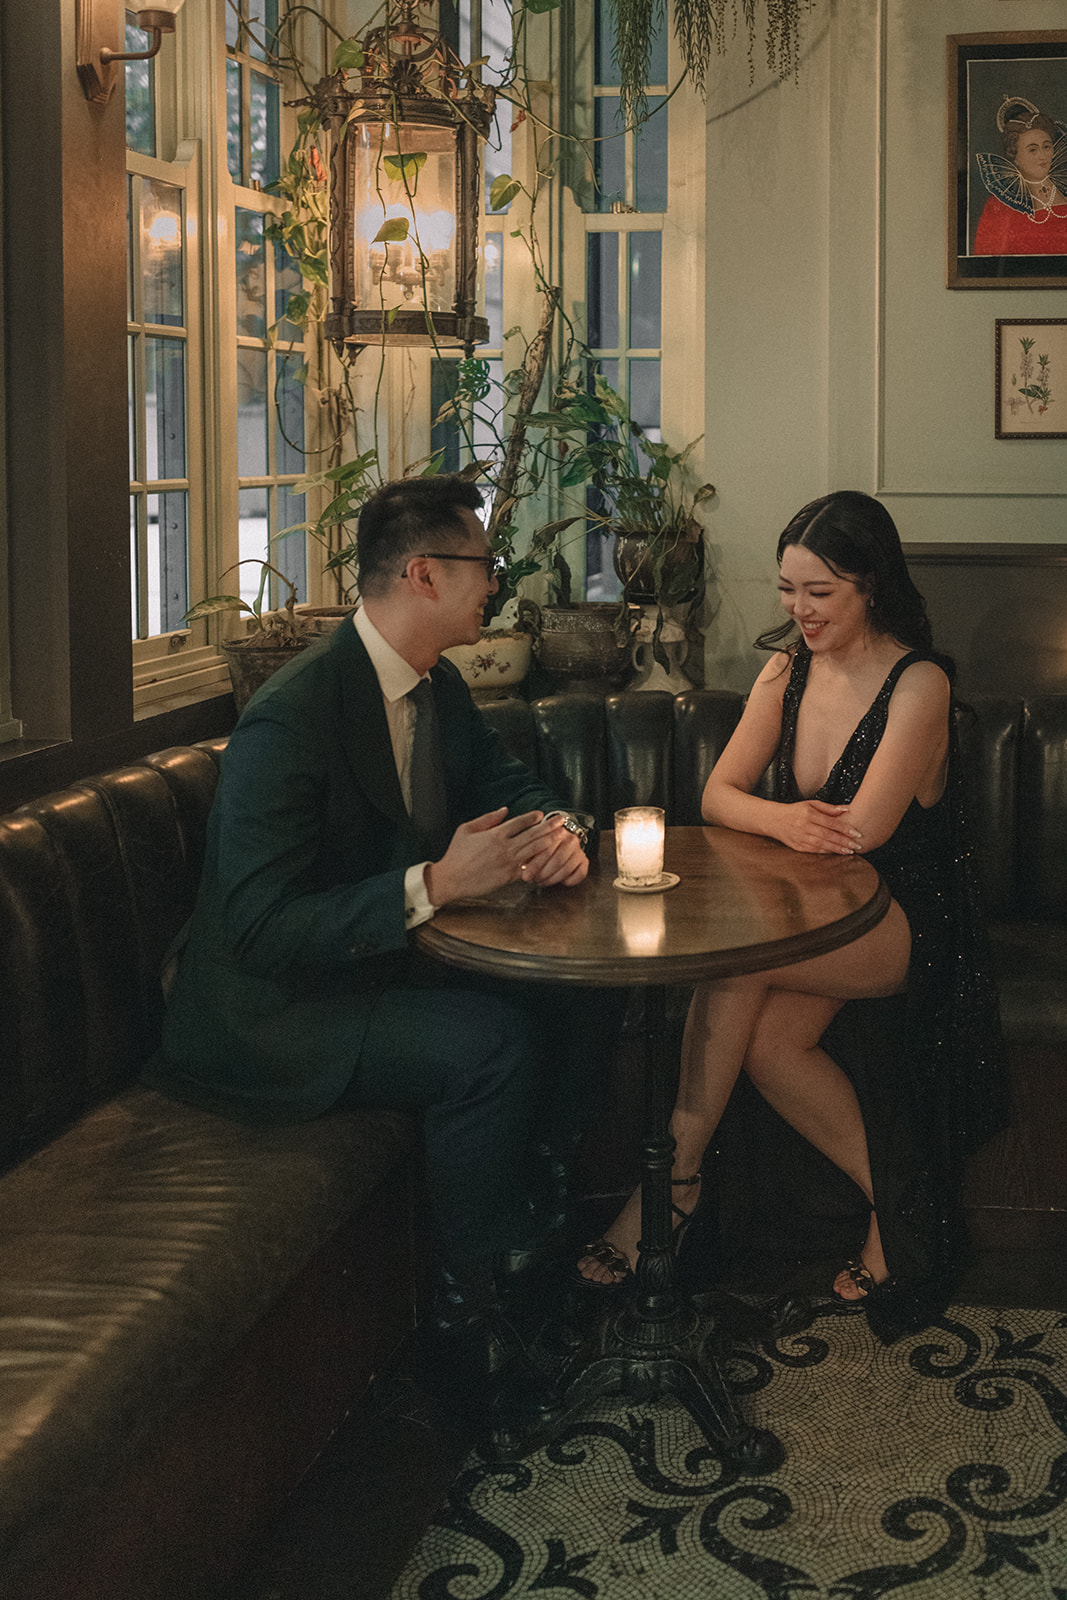 Old Hollywood glamour Chic Kittyhawk wedding date night Engagement Couple session Akaness Sharks Photo